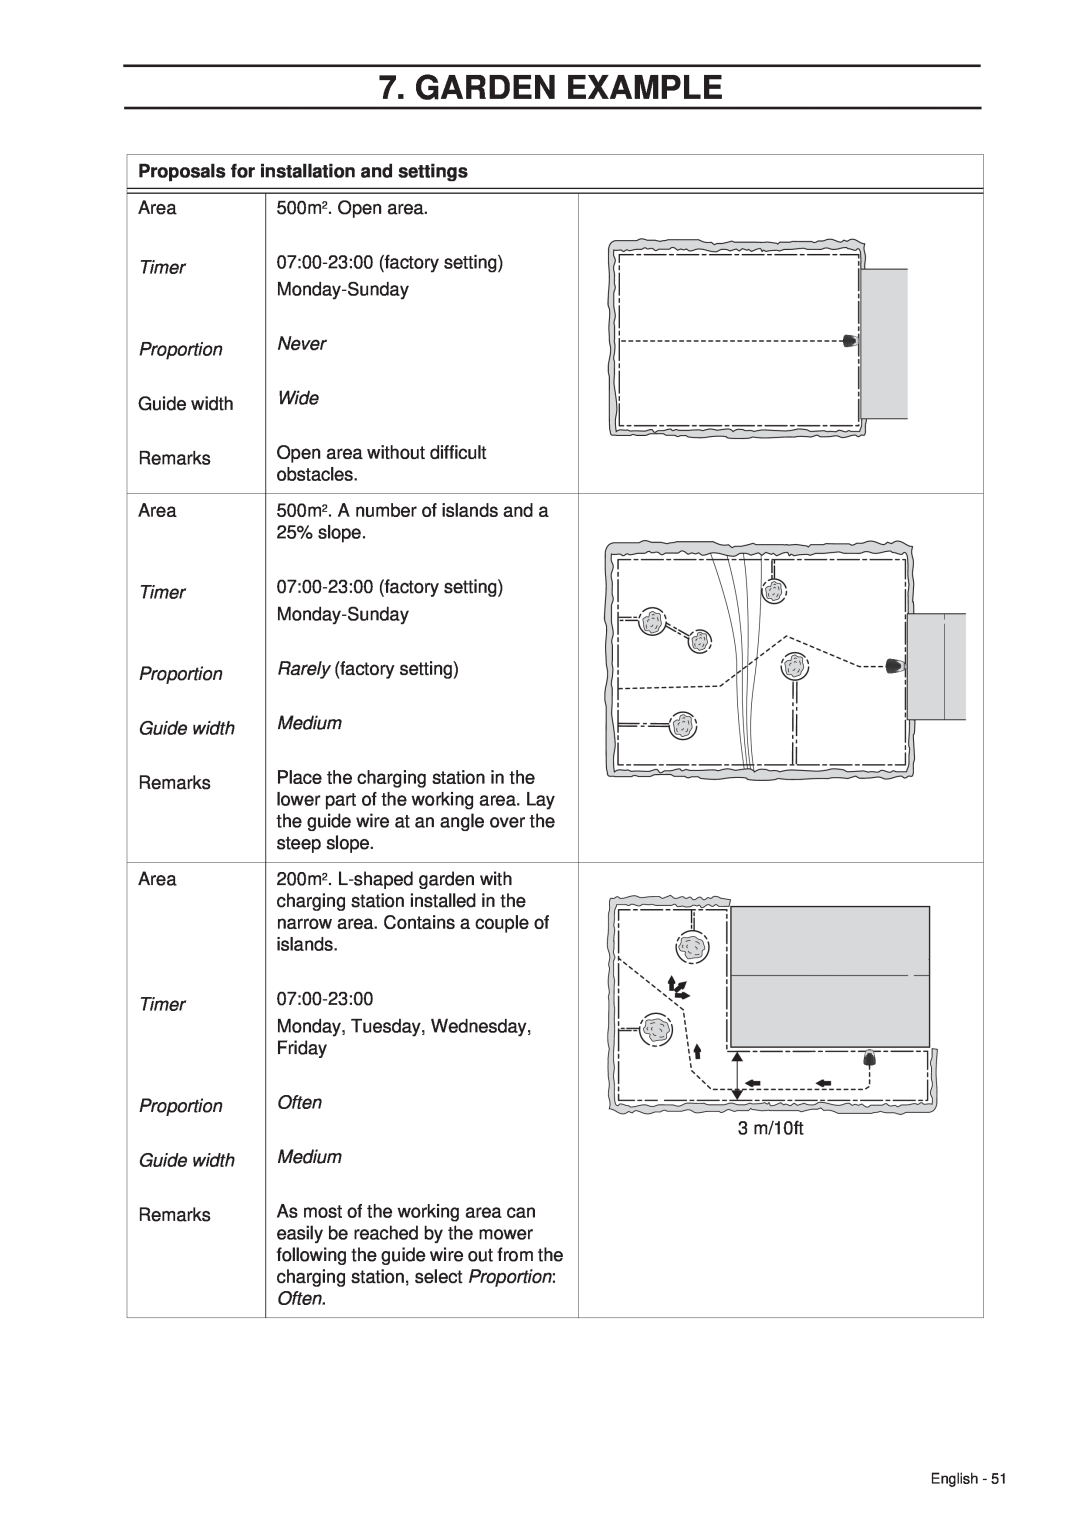 Husqvarna 305 manual Garden Example, Proposals for installation and settings 